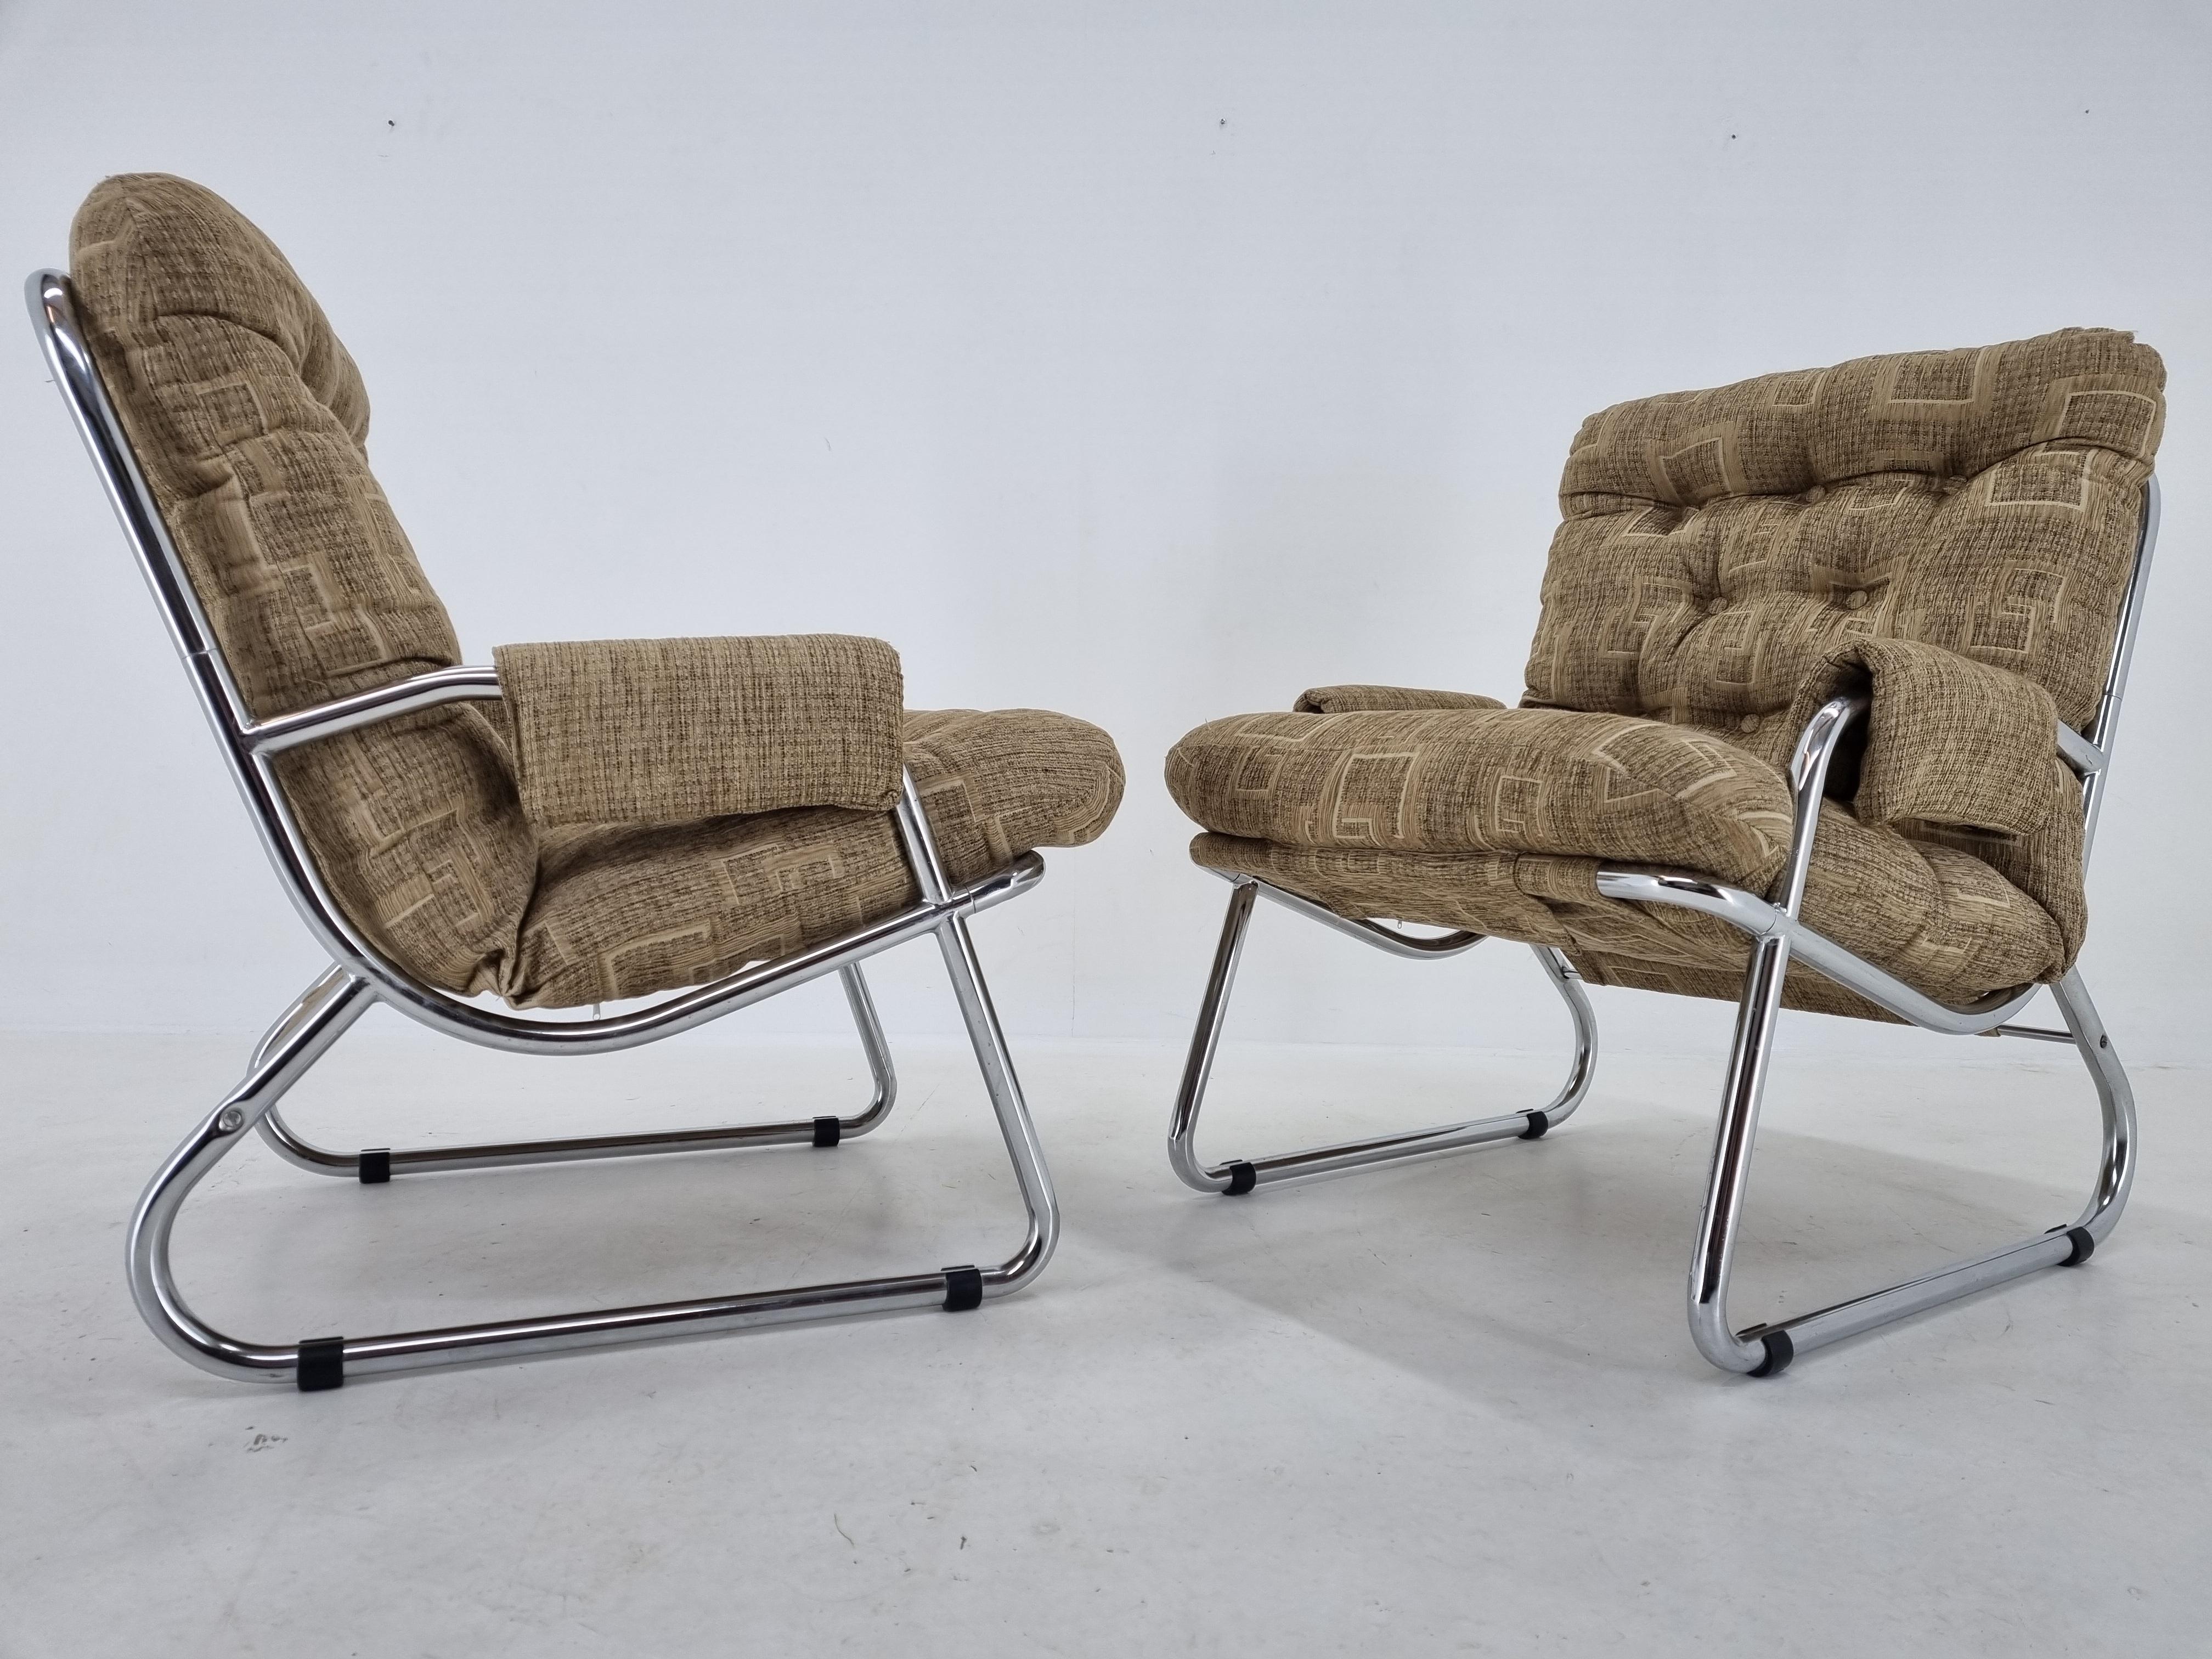 Late 20th Century Pair of Mid-Century Armchairs, Peter Hoyte, 1970s